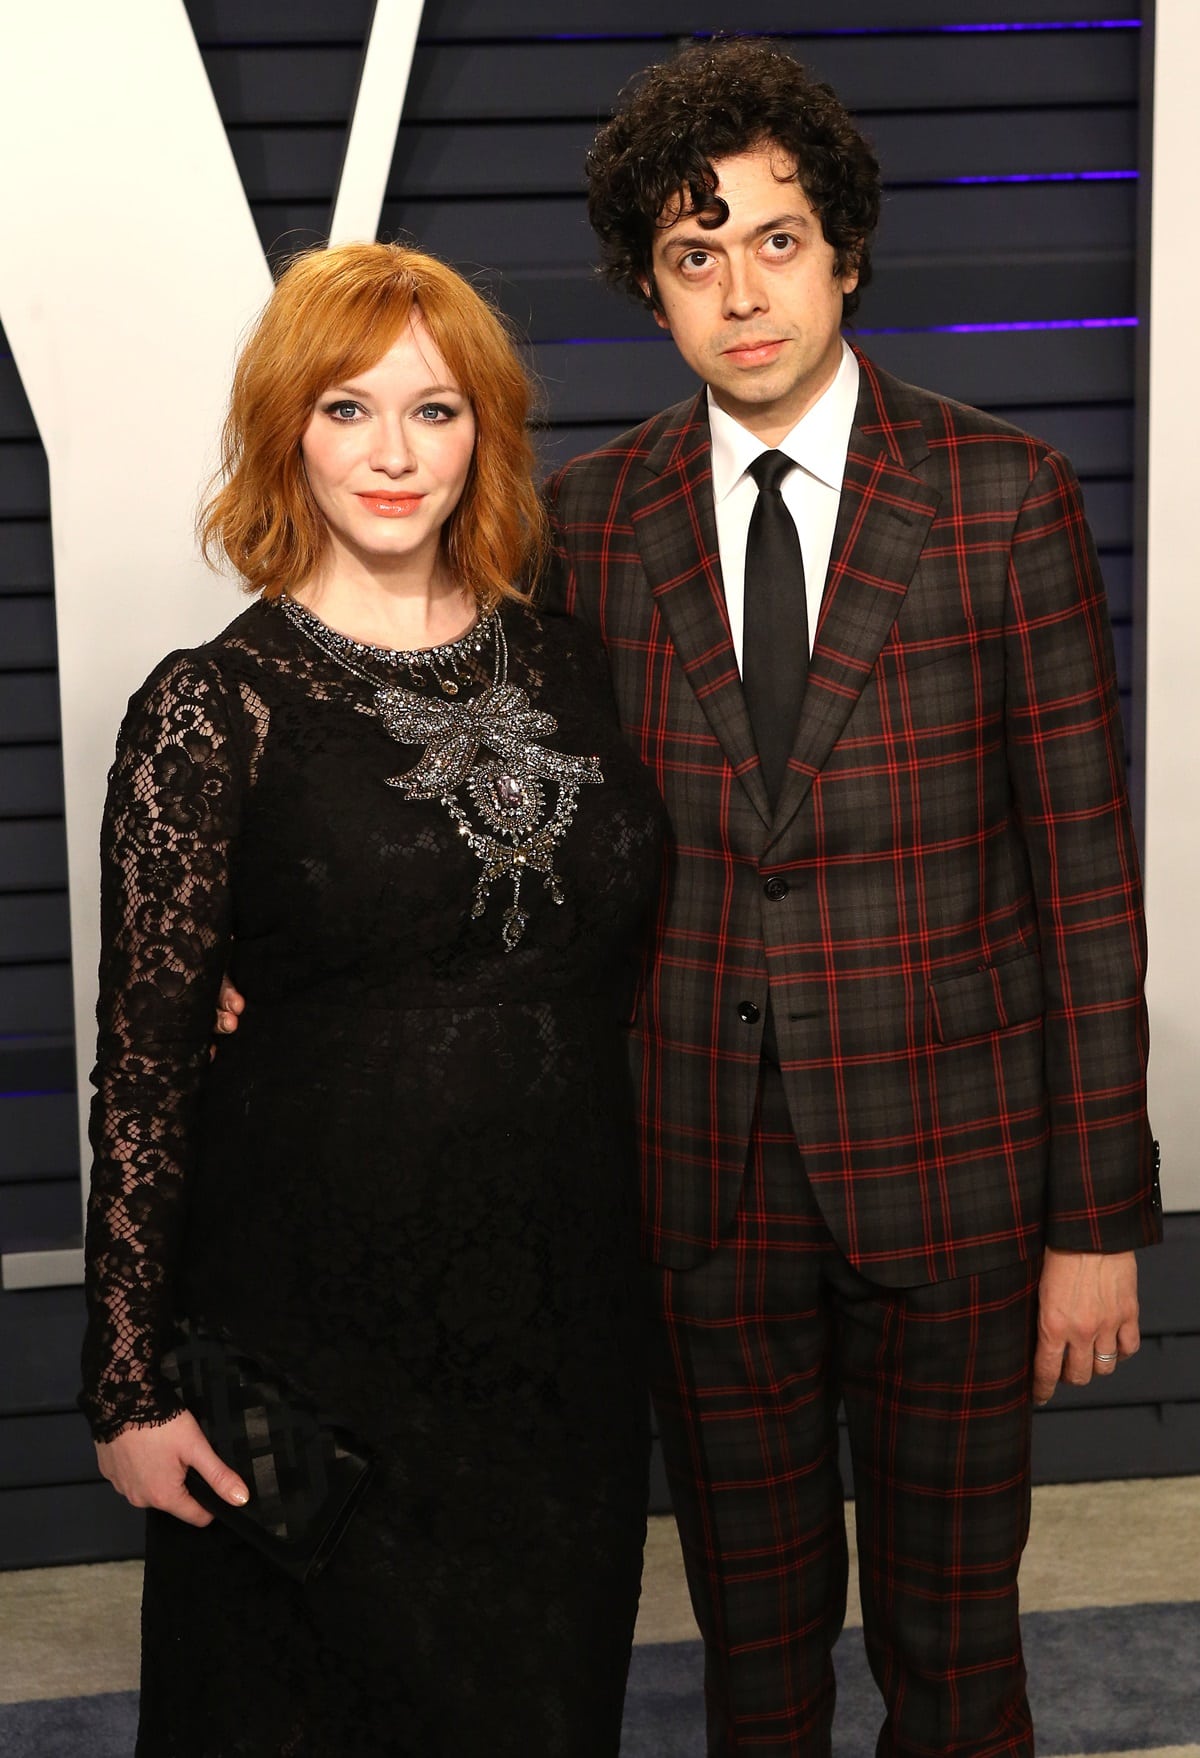 Christina Hendricks and Geoffrey Arend were married from 2009 to 2019 and met in 2007 through her Mad Men co-star Vincent Kartheiser